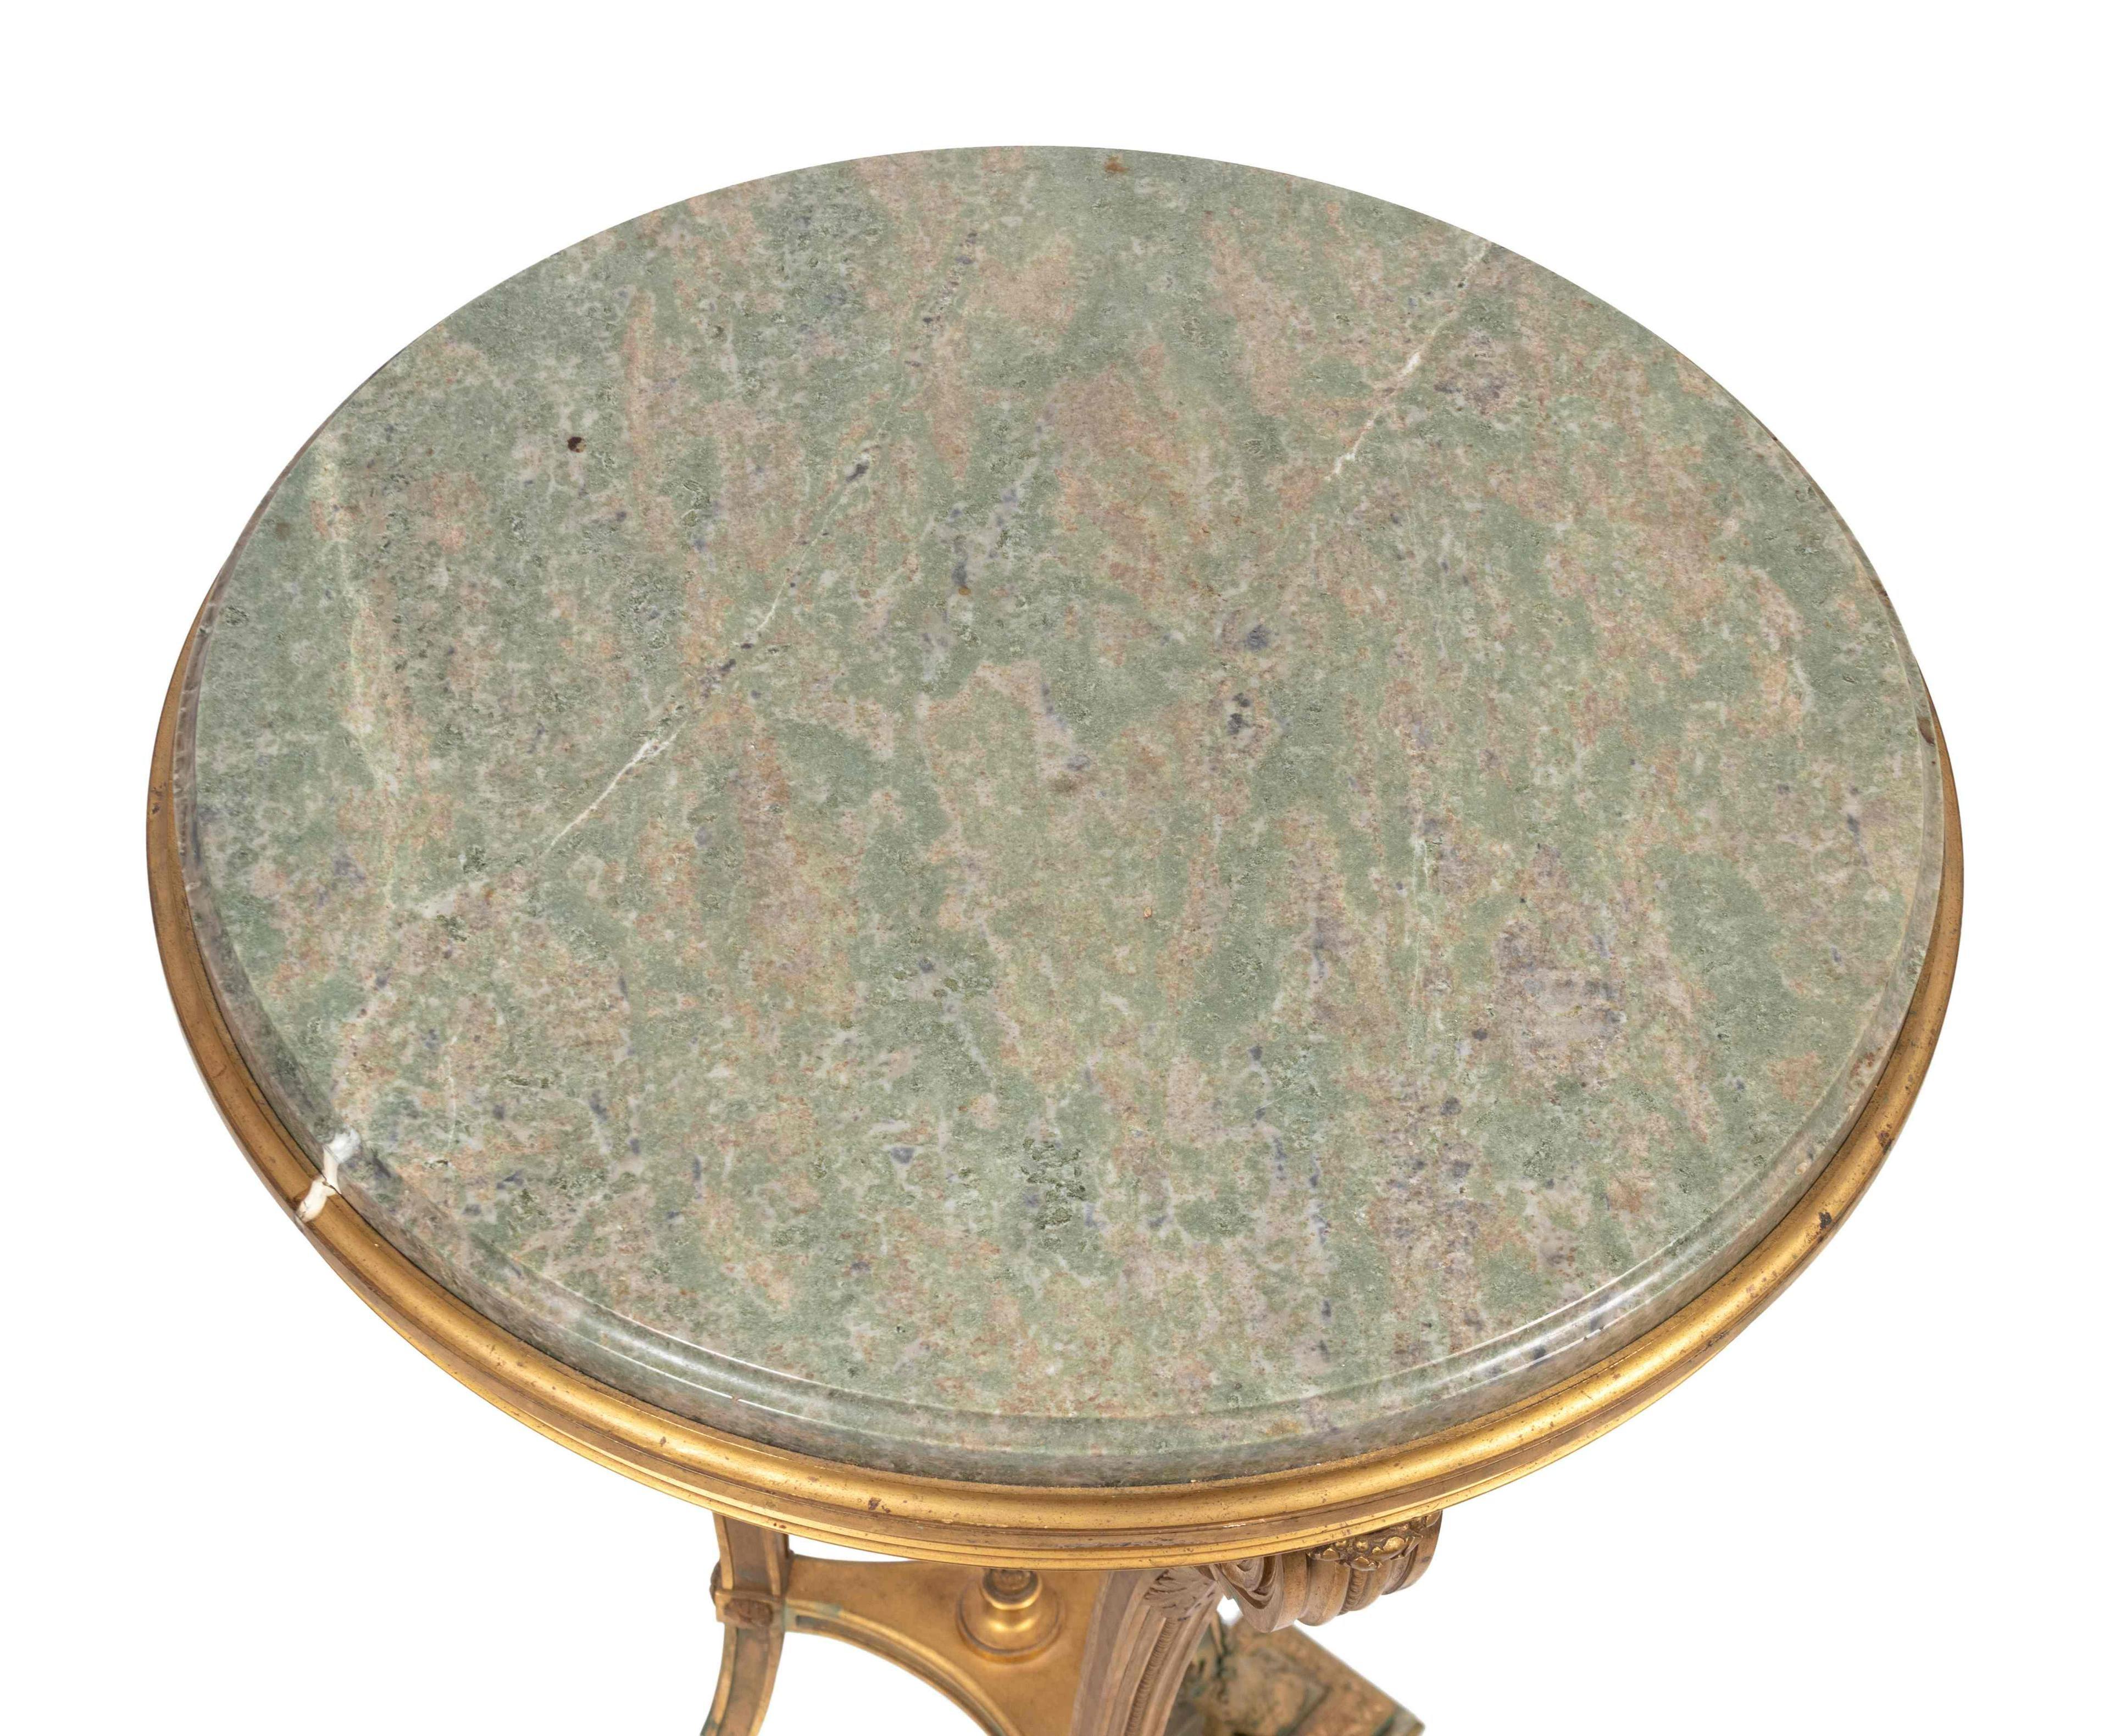 A magnificent Louis XVI style gilt bronze and marble guéridon by Victor Raulin, France, circa 1880.
Signature to wooden circular support beneath marble top.
Dimensions: Height 32 1/2